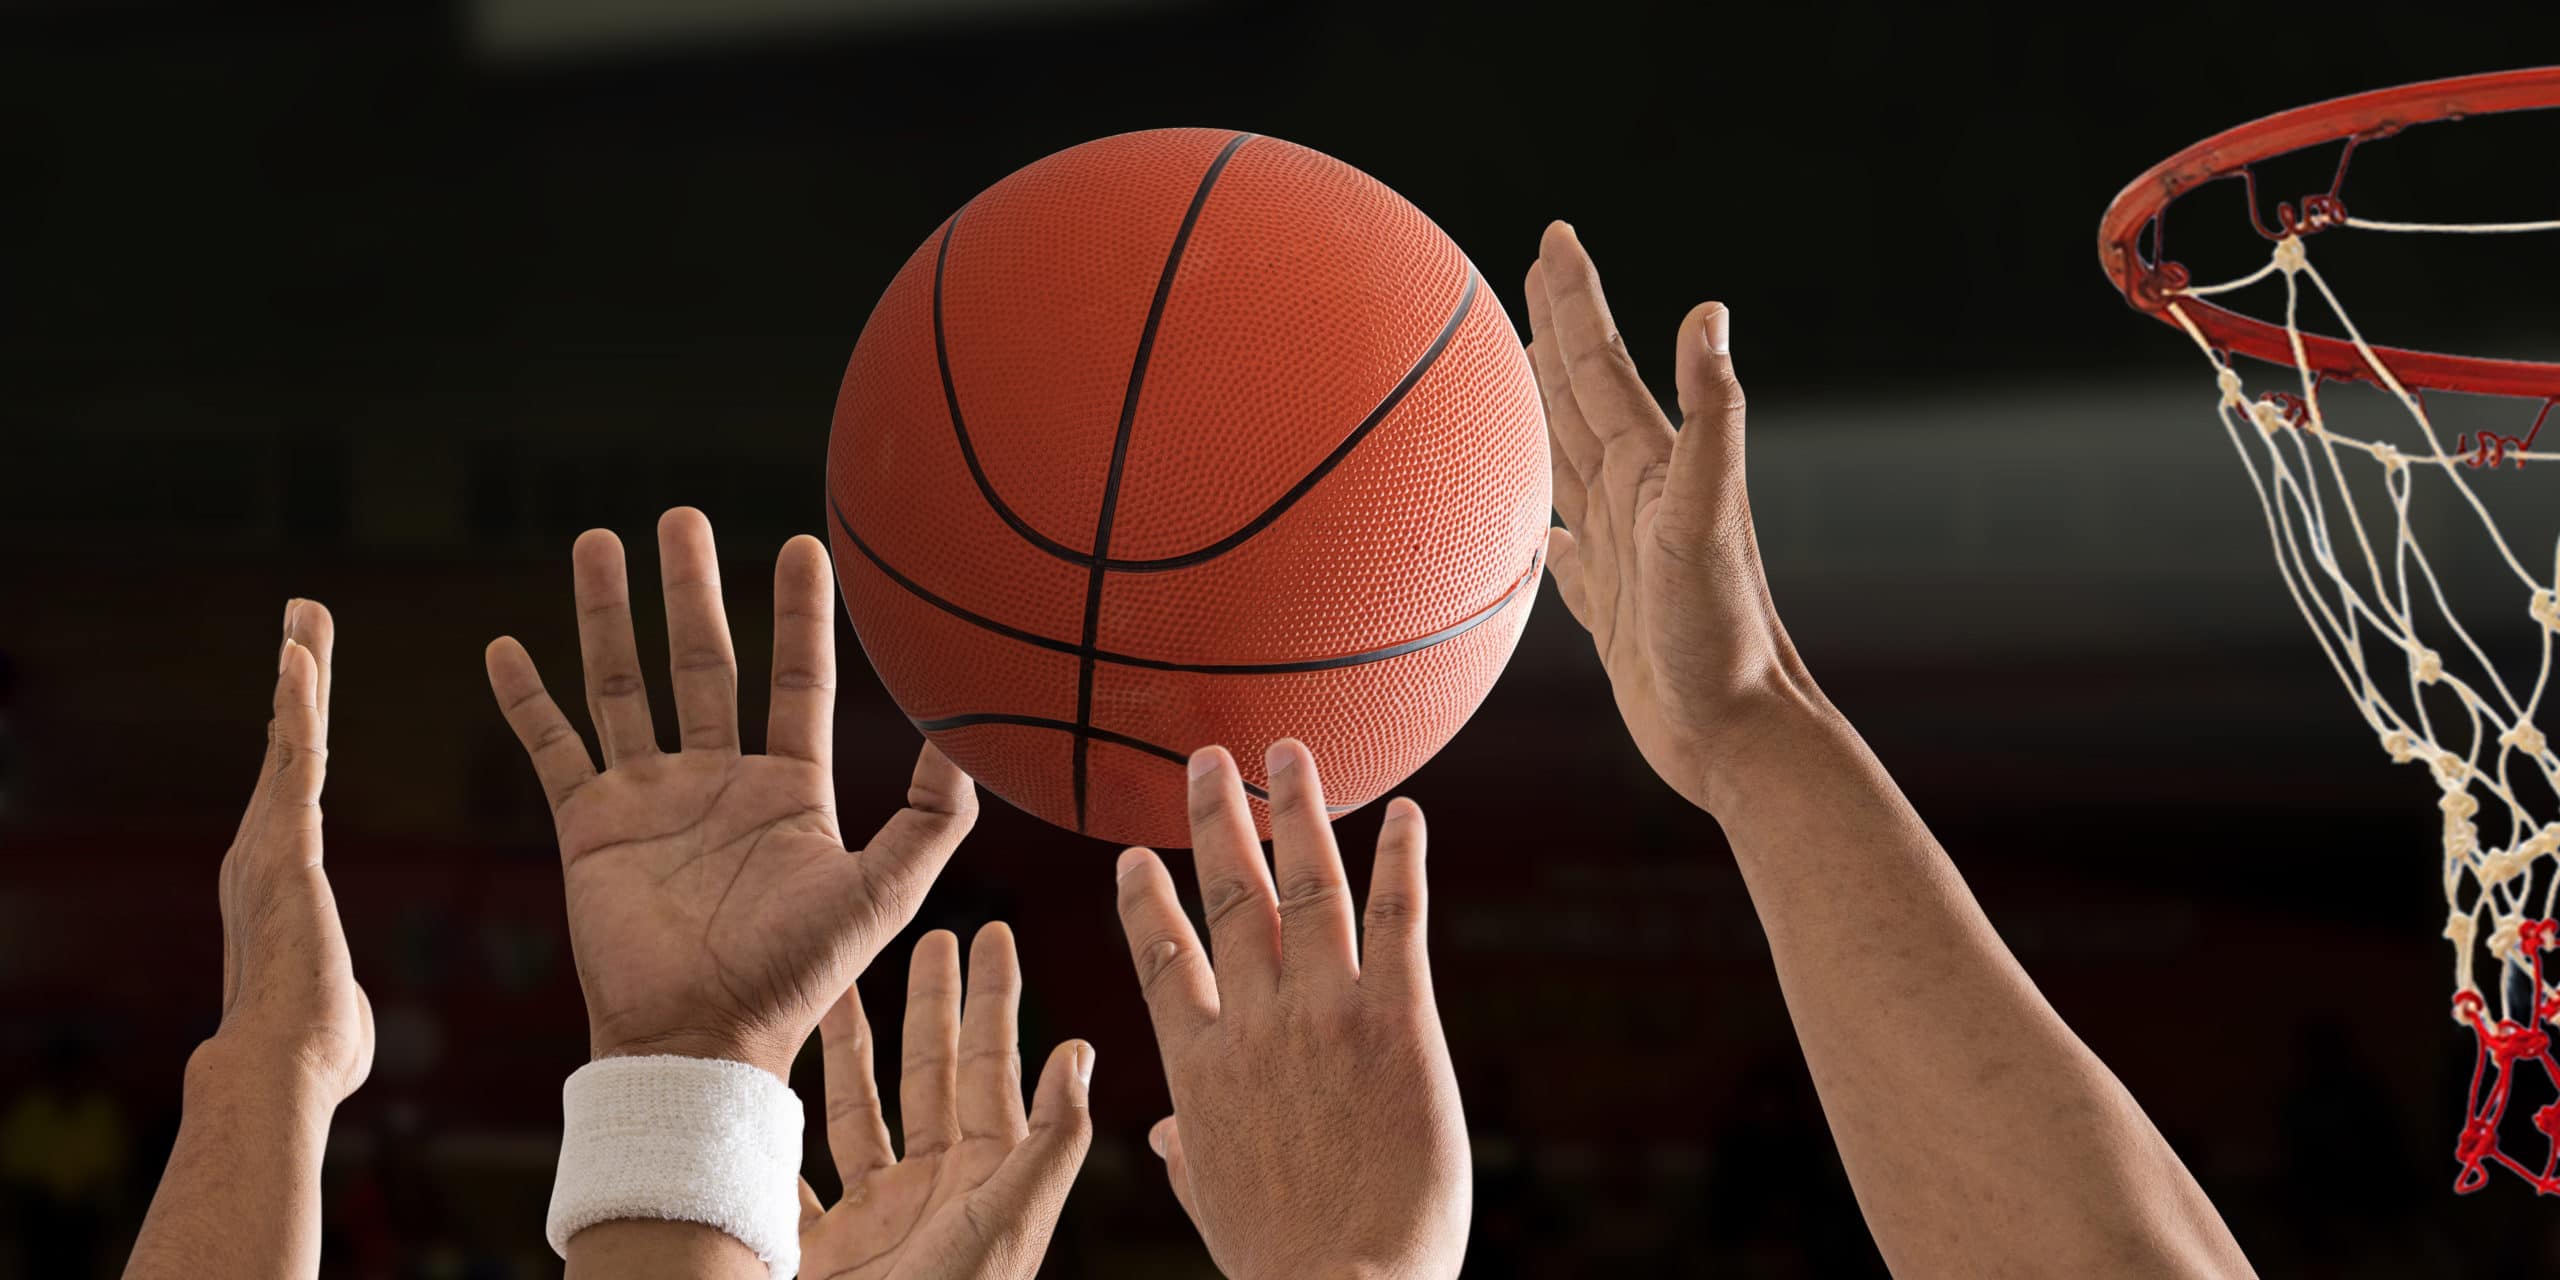 5 Common Injuries in Basketball and How to Avoid Them